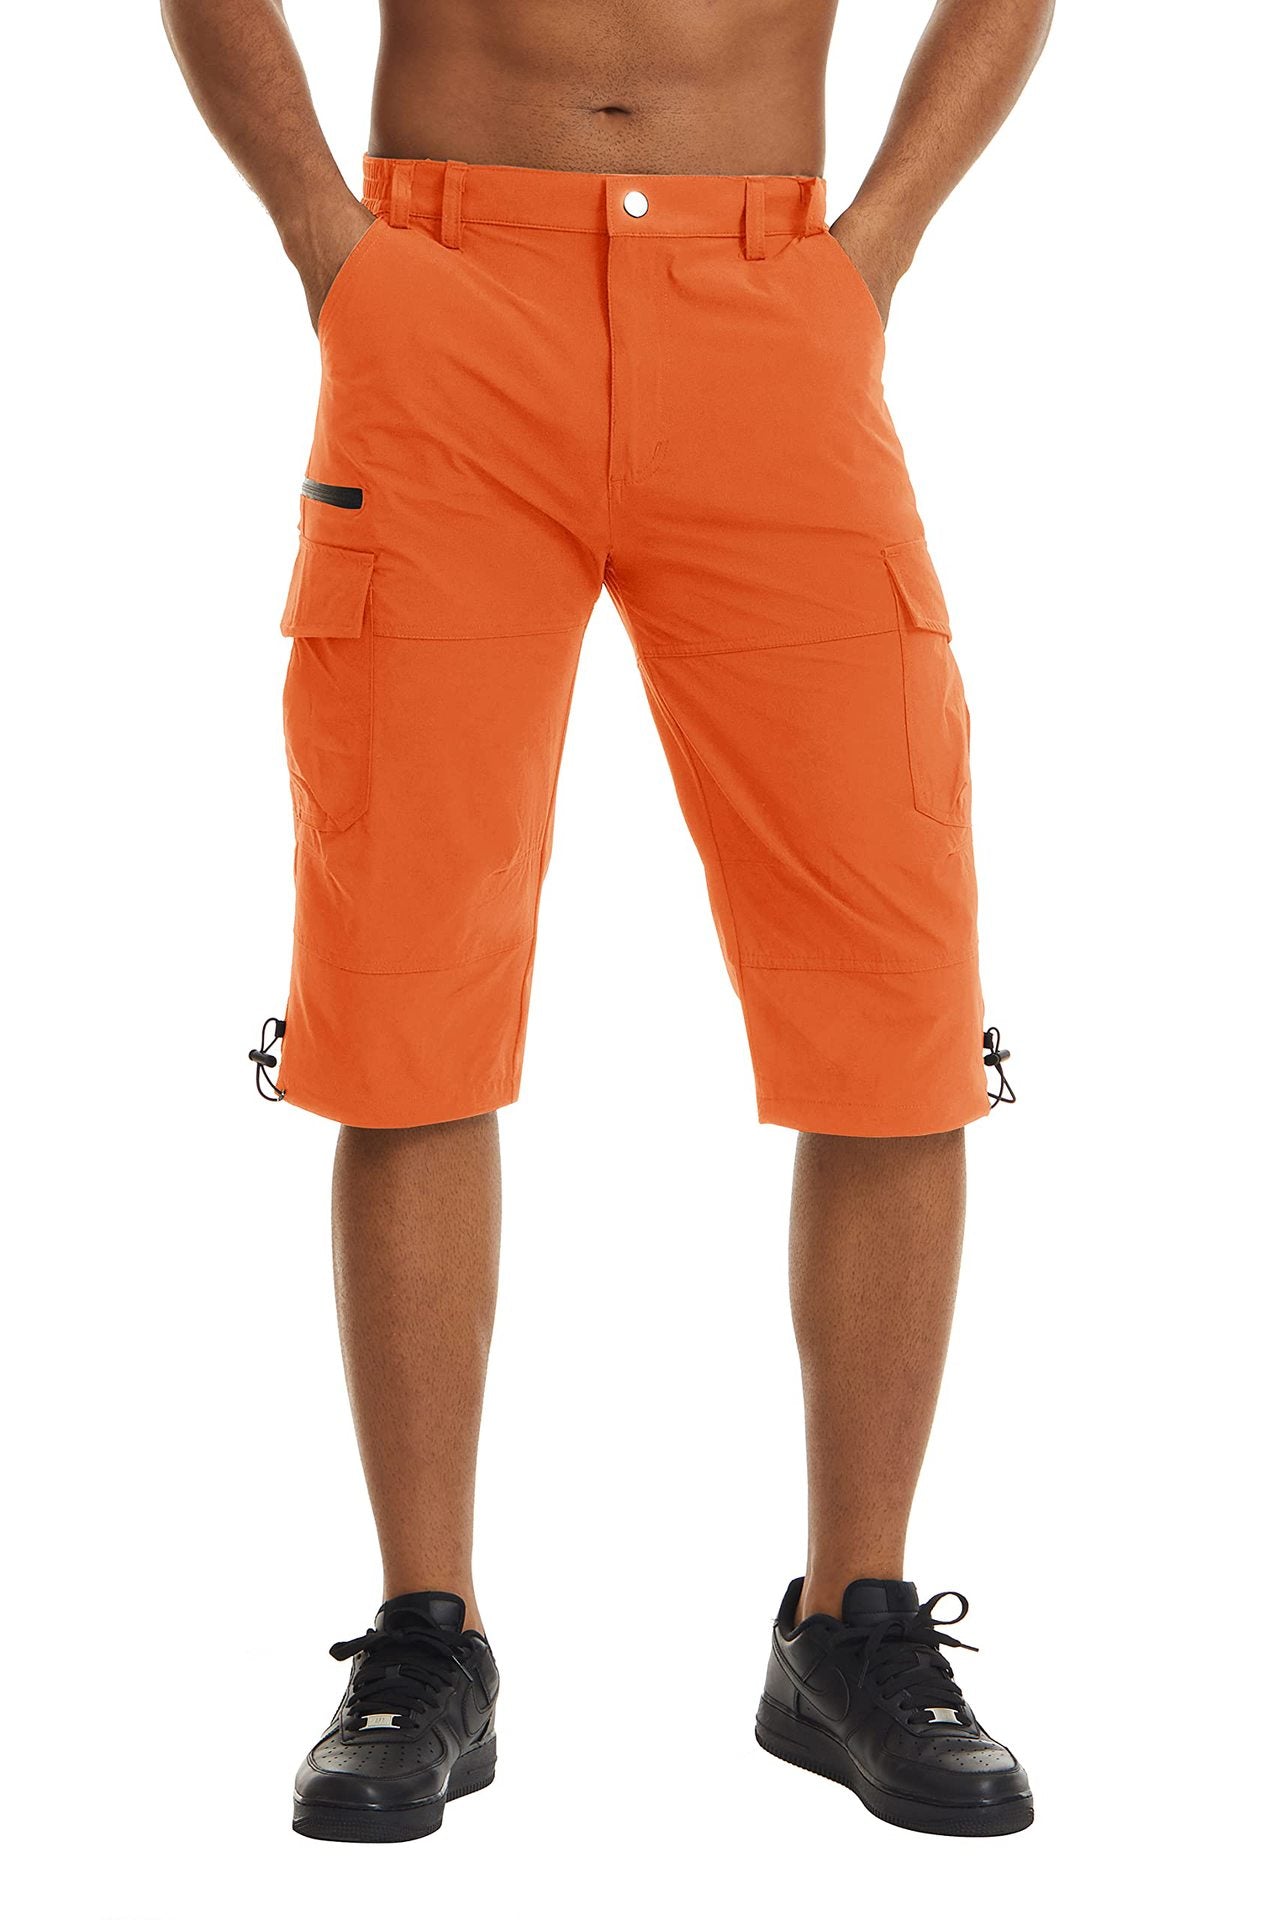 Summer Cropped Trousers For Men Thin Loose Casual Straight Pants Outdoor Sports